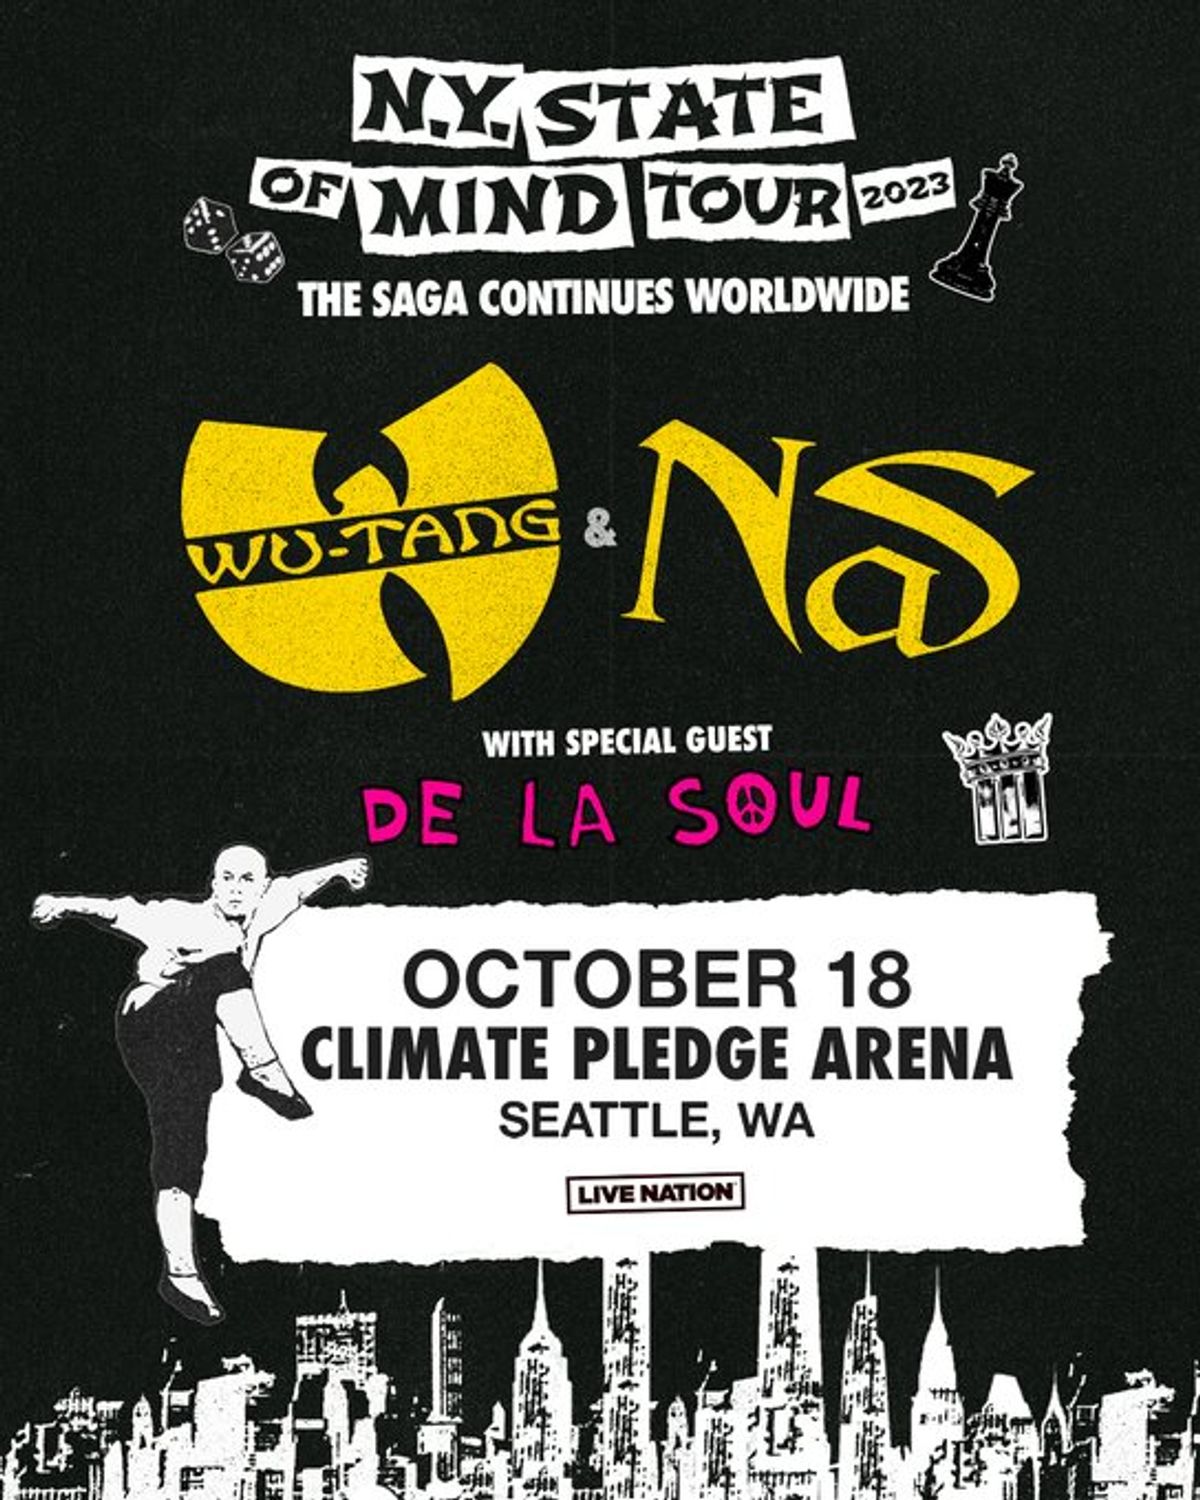 WuTang Clan & Nas NY State Of Mind Tour with De La Soul at Climate